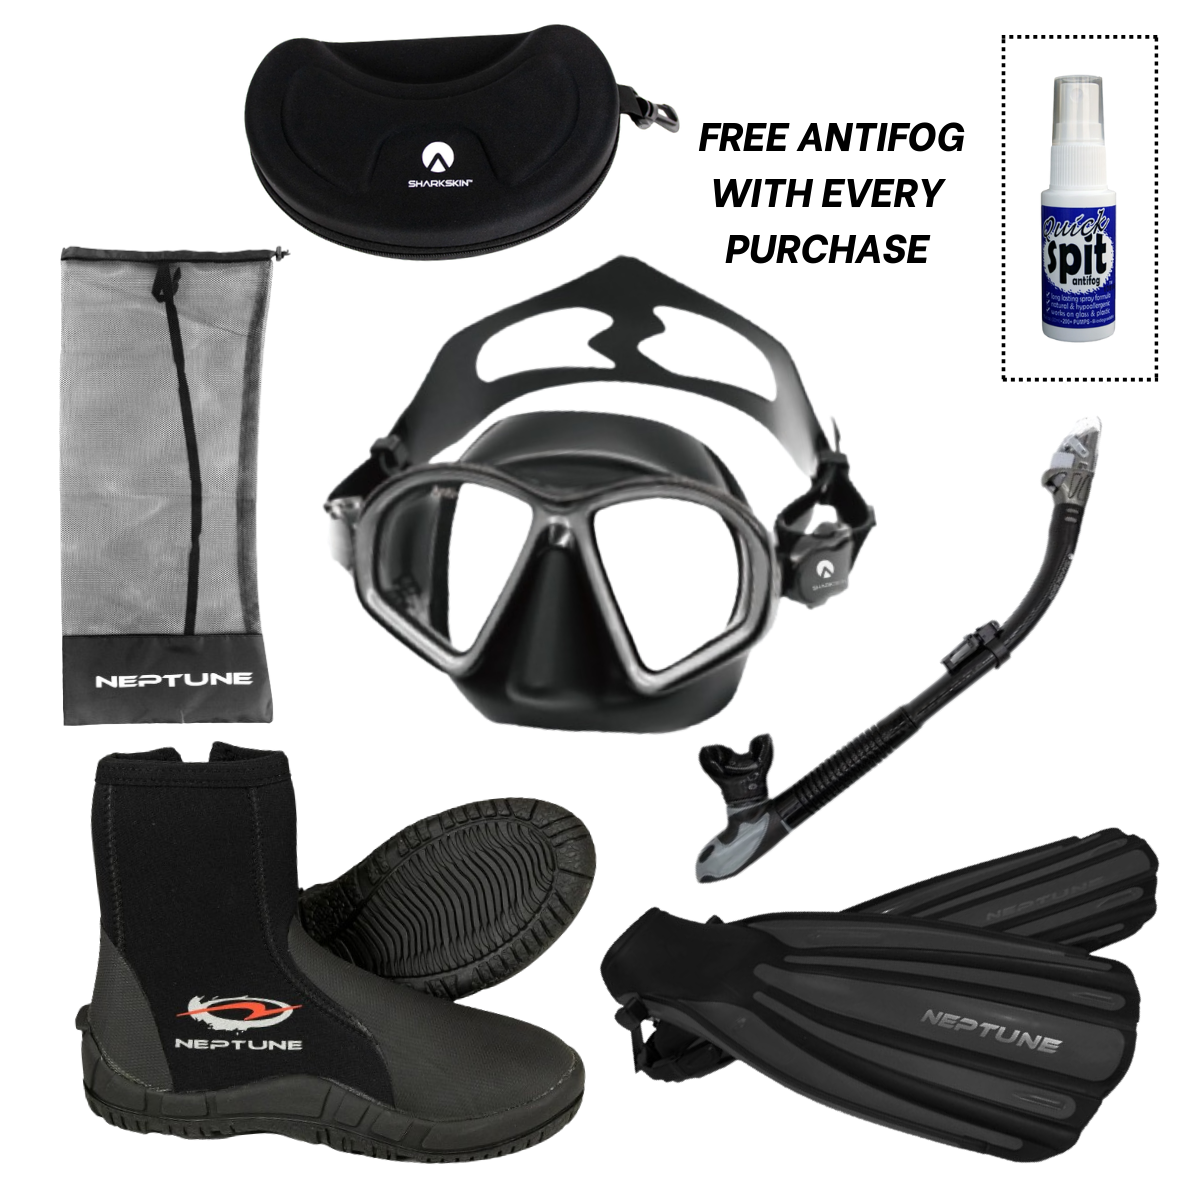 Sharkskin Accelerate Ultimate SeaClear Mask, EasyClear Dry Snorkel Neptune Explorer Dive Boots, F4 Accelerate Fin Package + Free Anti-fog